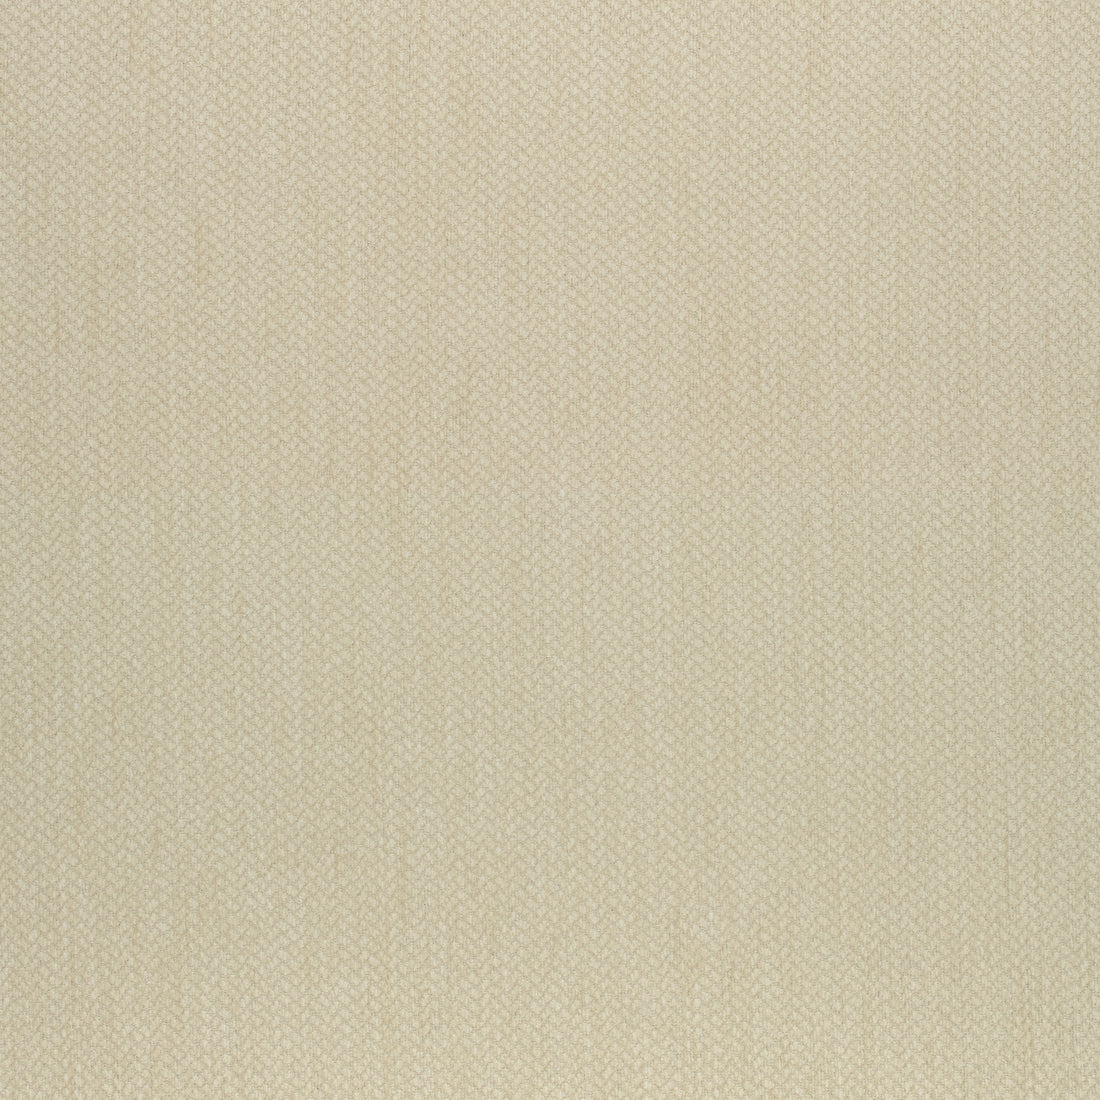 Orion fabric in honey color - pattern number W80505 - by Thibaut in the Mosaic collection